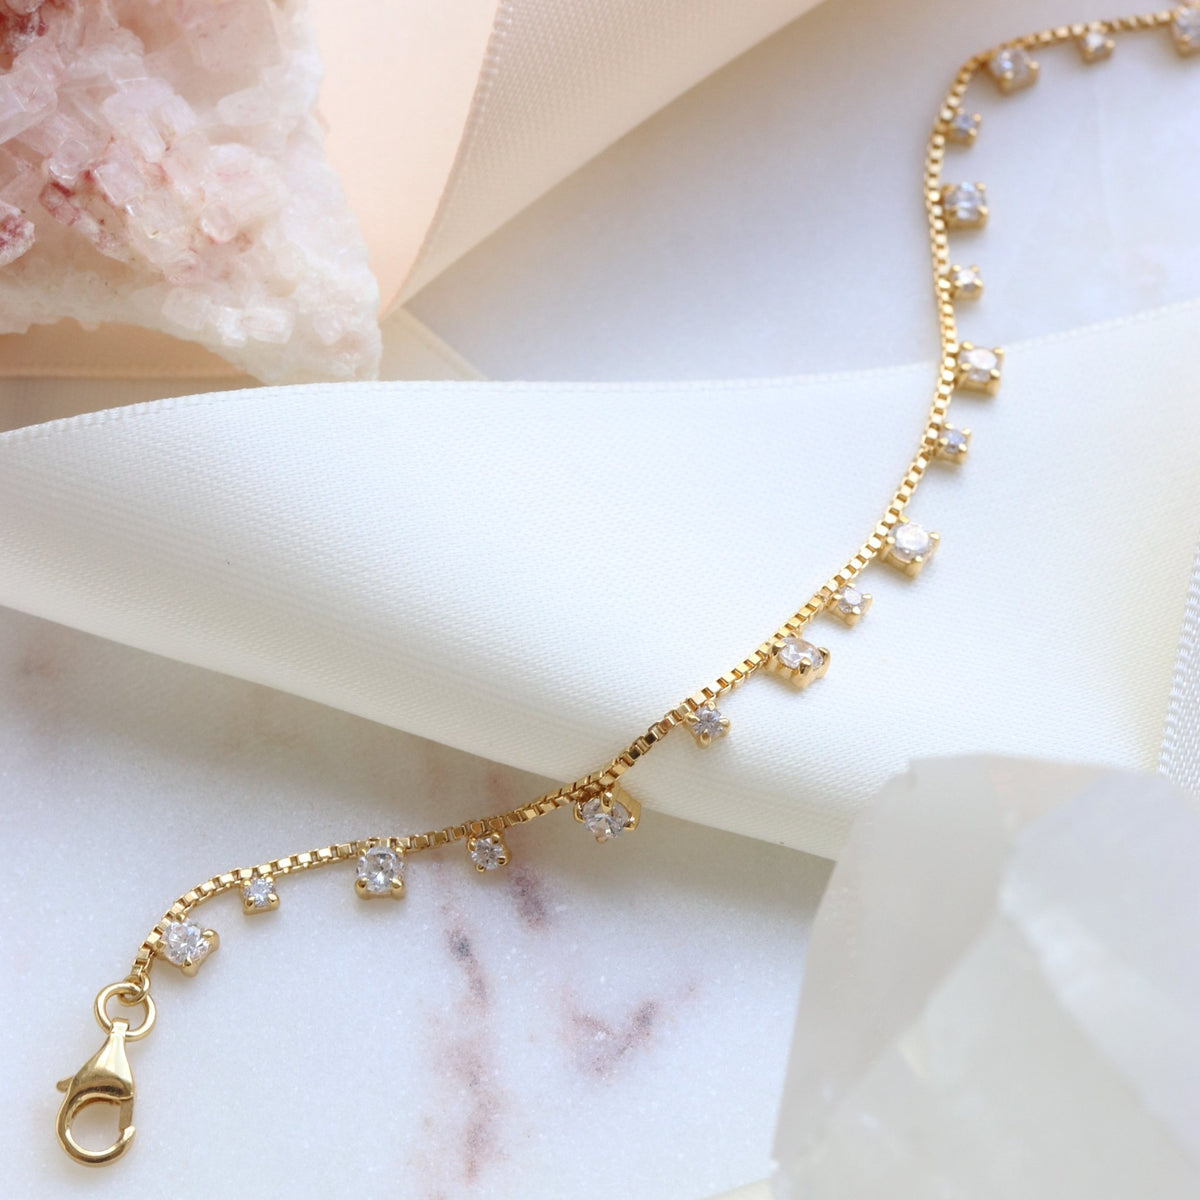 SCATTERED LOVE BRACELET - CUBIC ZIRCONIA &amp; GOLD - SO PRETTY CARA COTTER